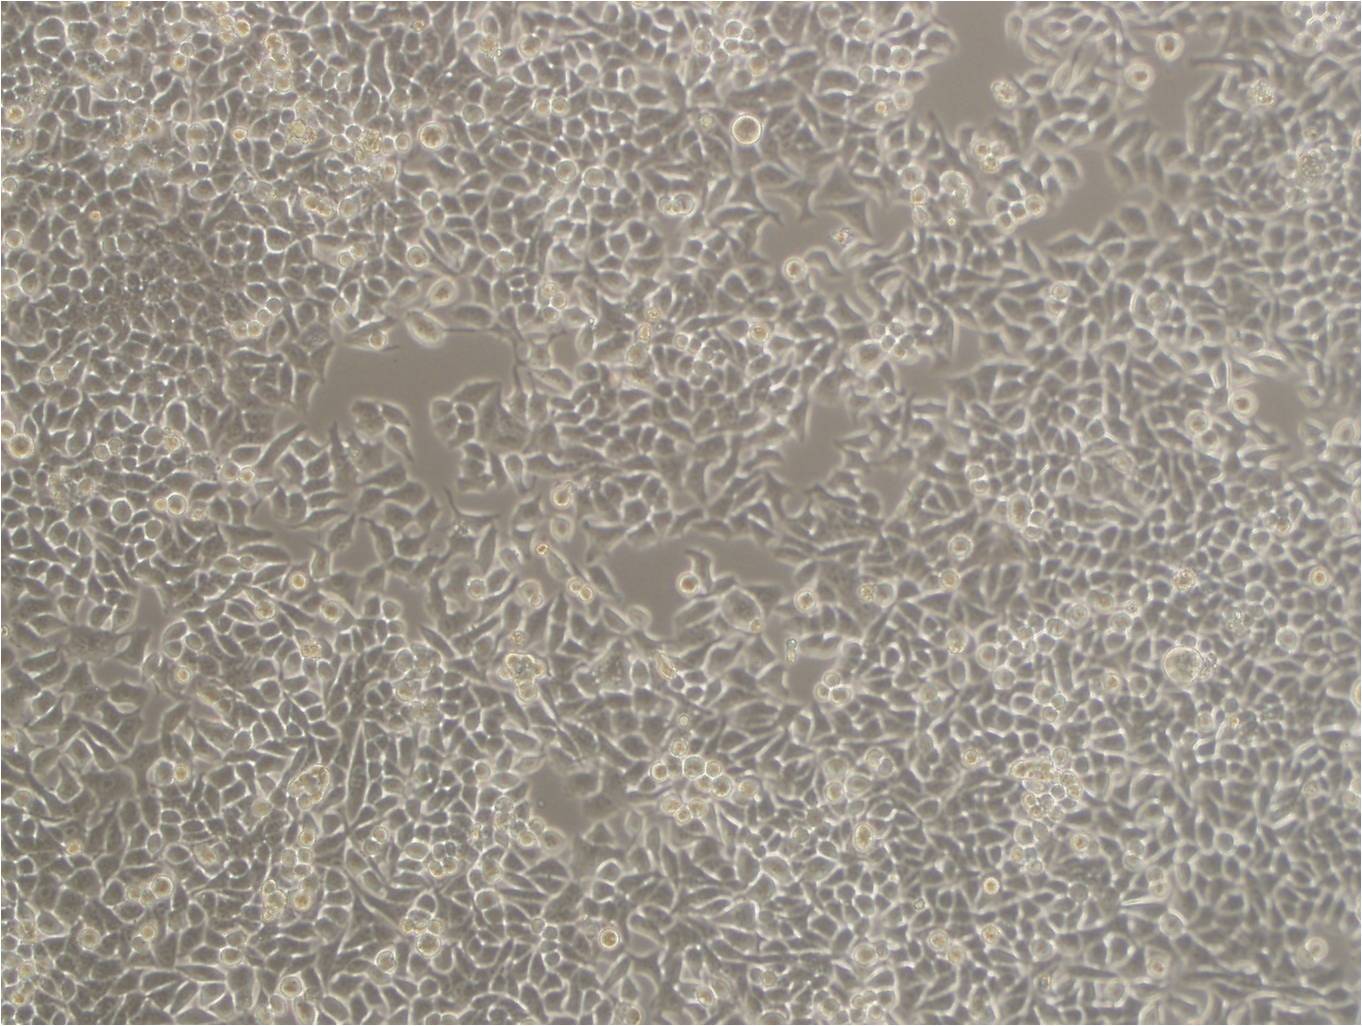 G-292 clone A141B1 epithelioid cells人骨肉瘤细胞系,G-292 clone A141B1 epithelioid cells